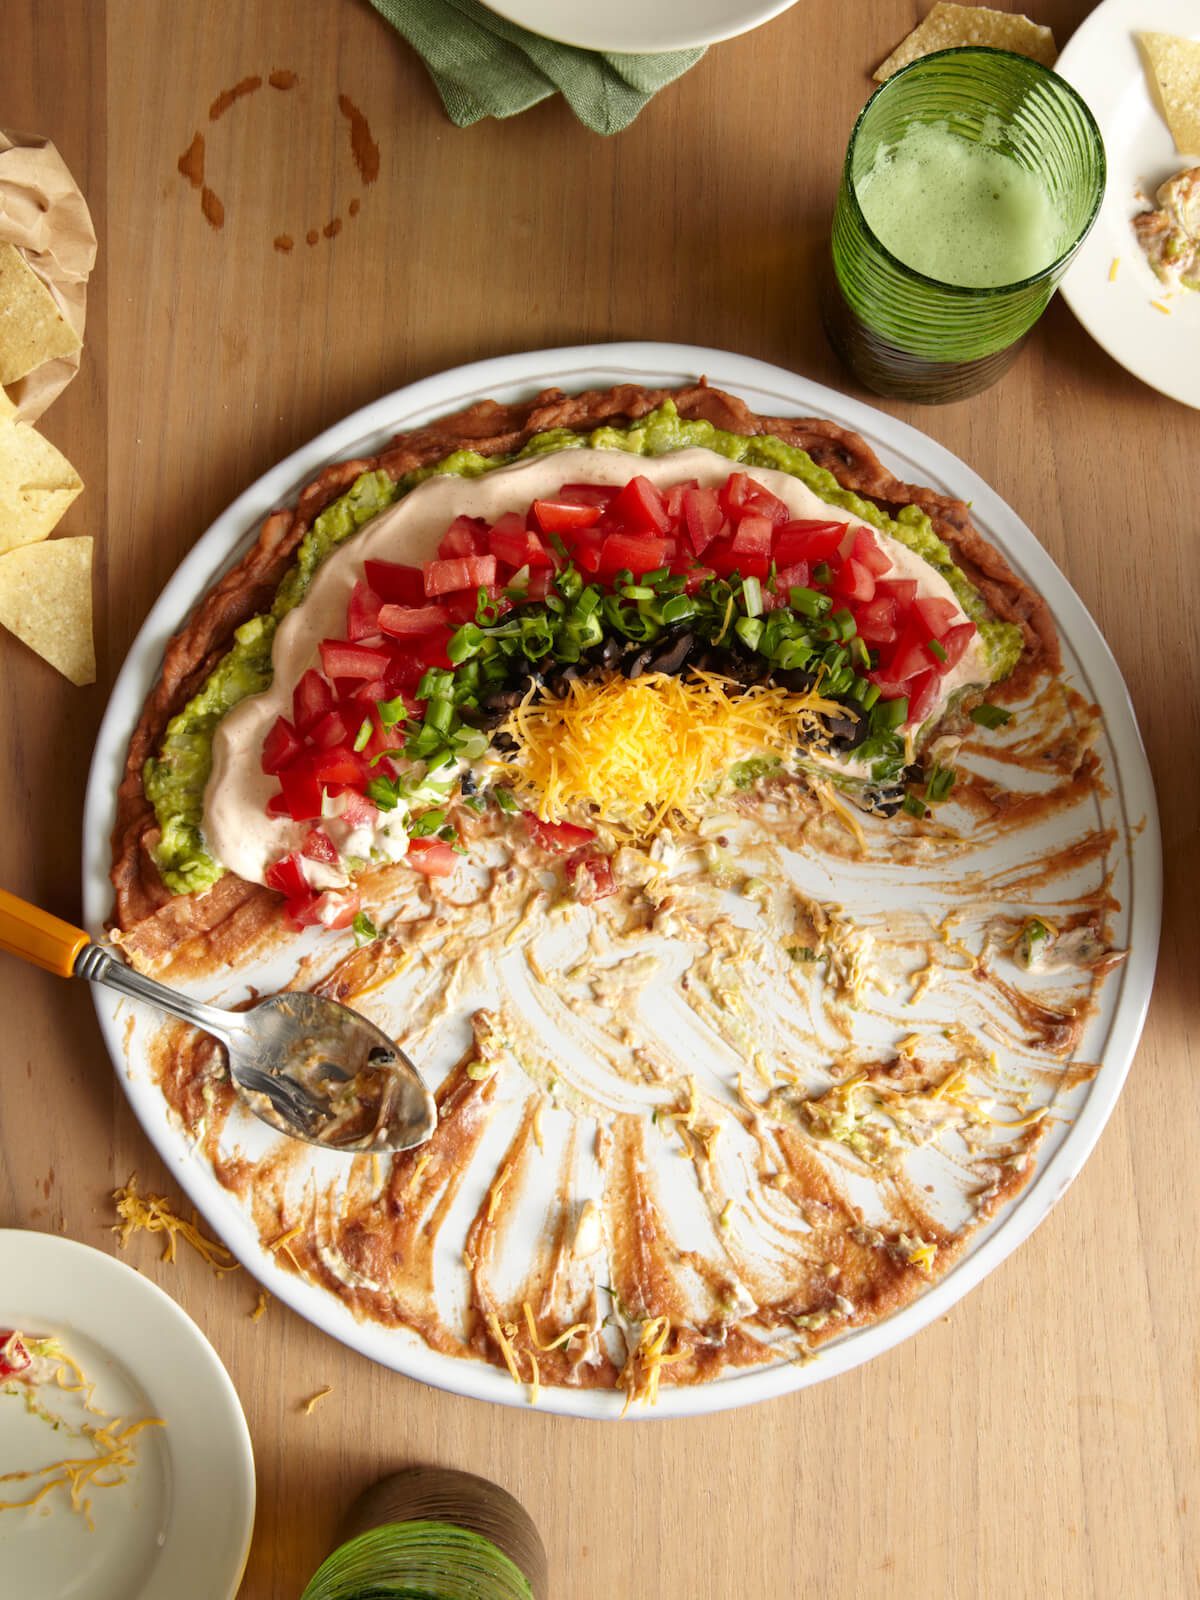 7 layer dip half eaten on a white round platter on wooden table party scene.